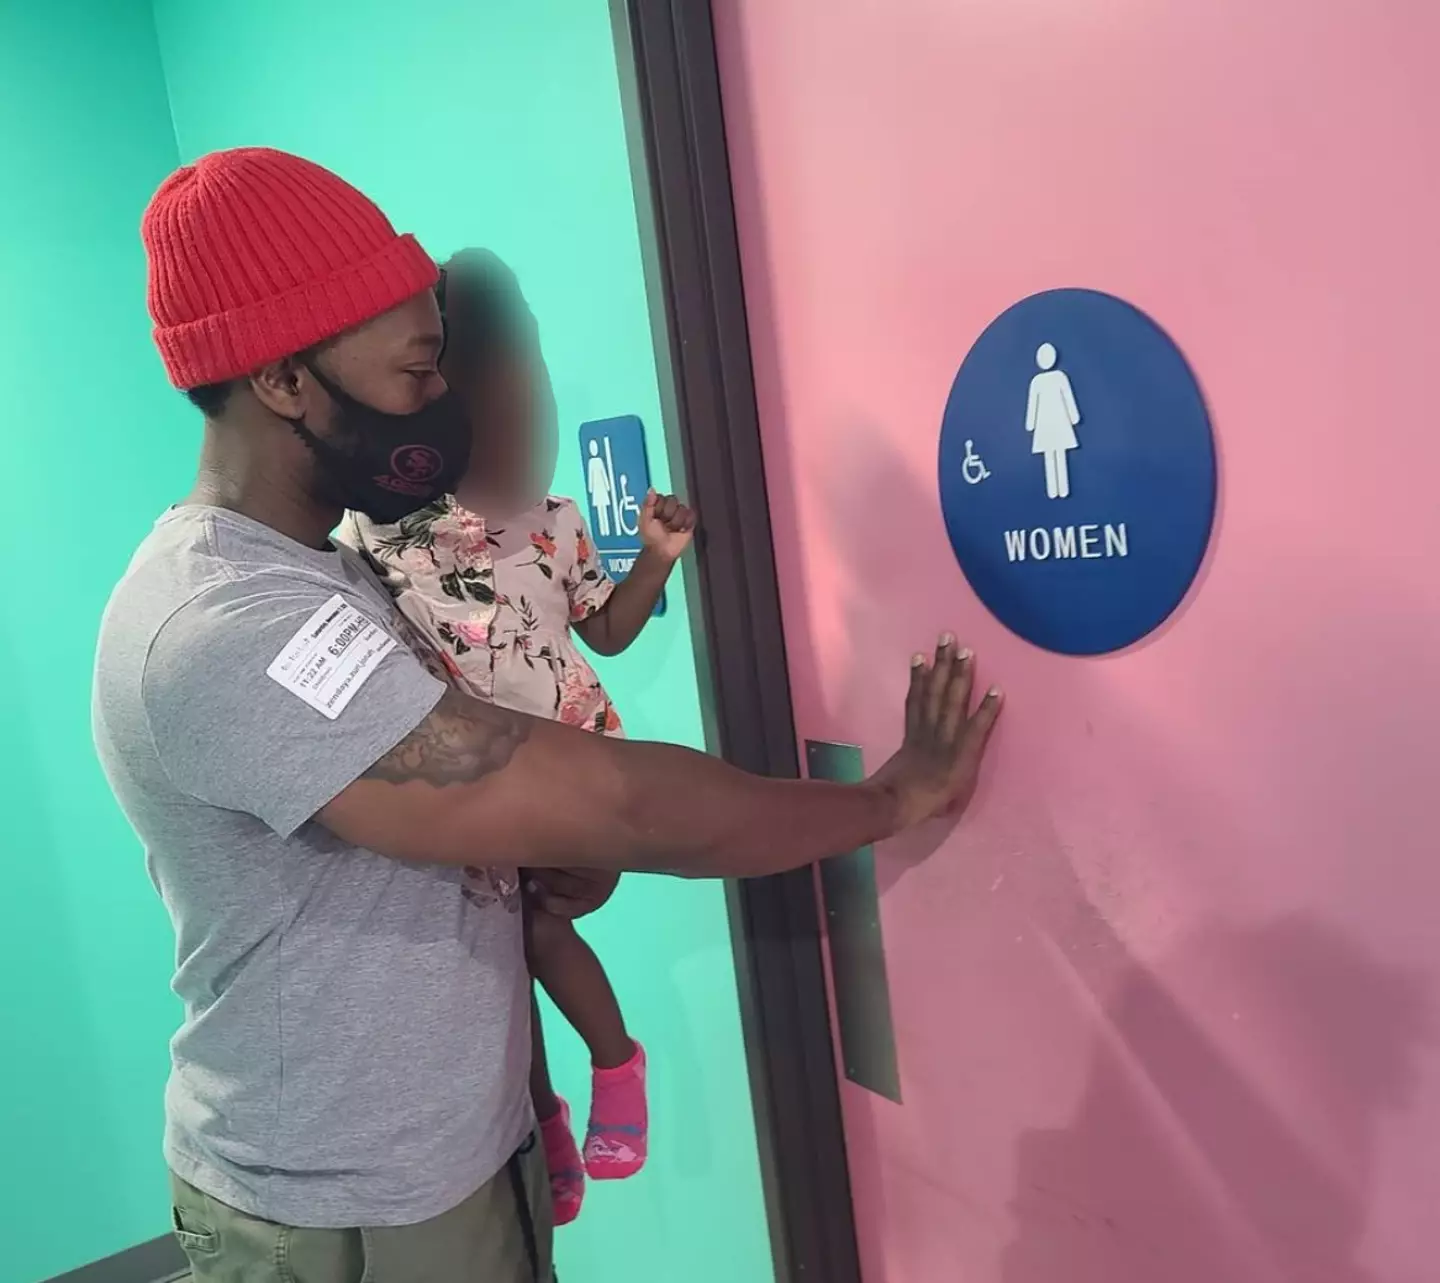 Muhammed takes his daughter into the ladies' bathroom.